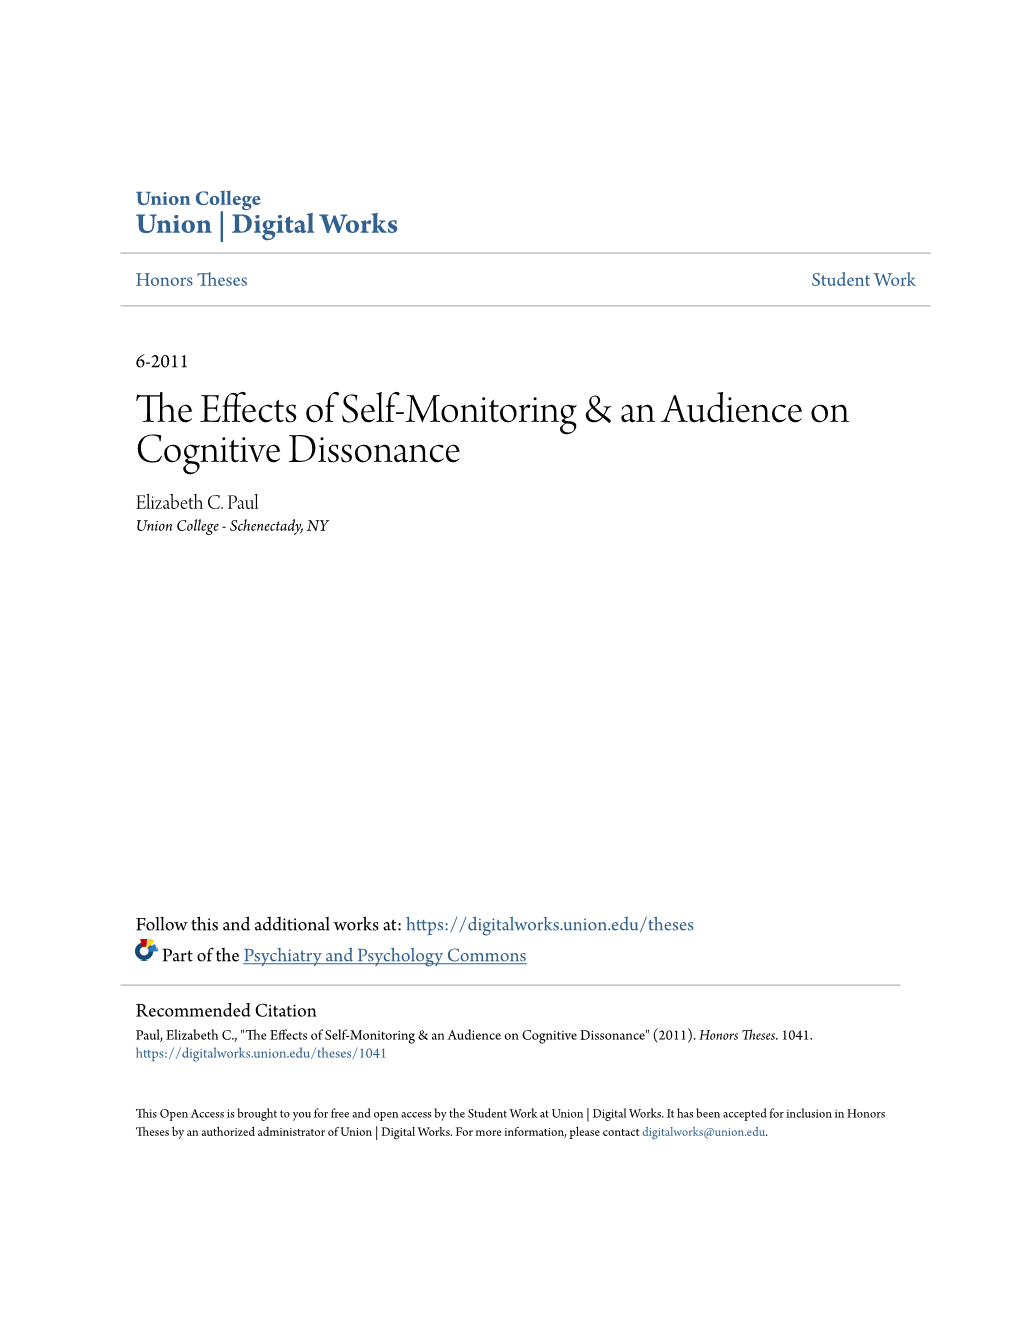 The Effects of Self-Monitoring & an Audience on Cognitive Dissonance